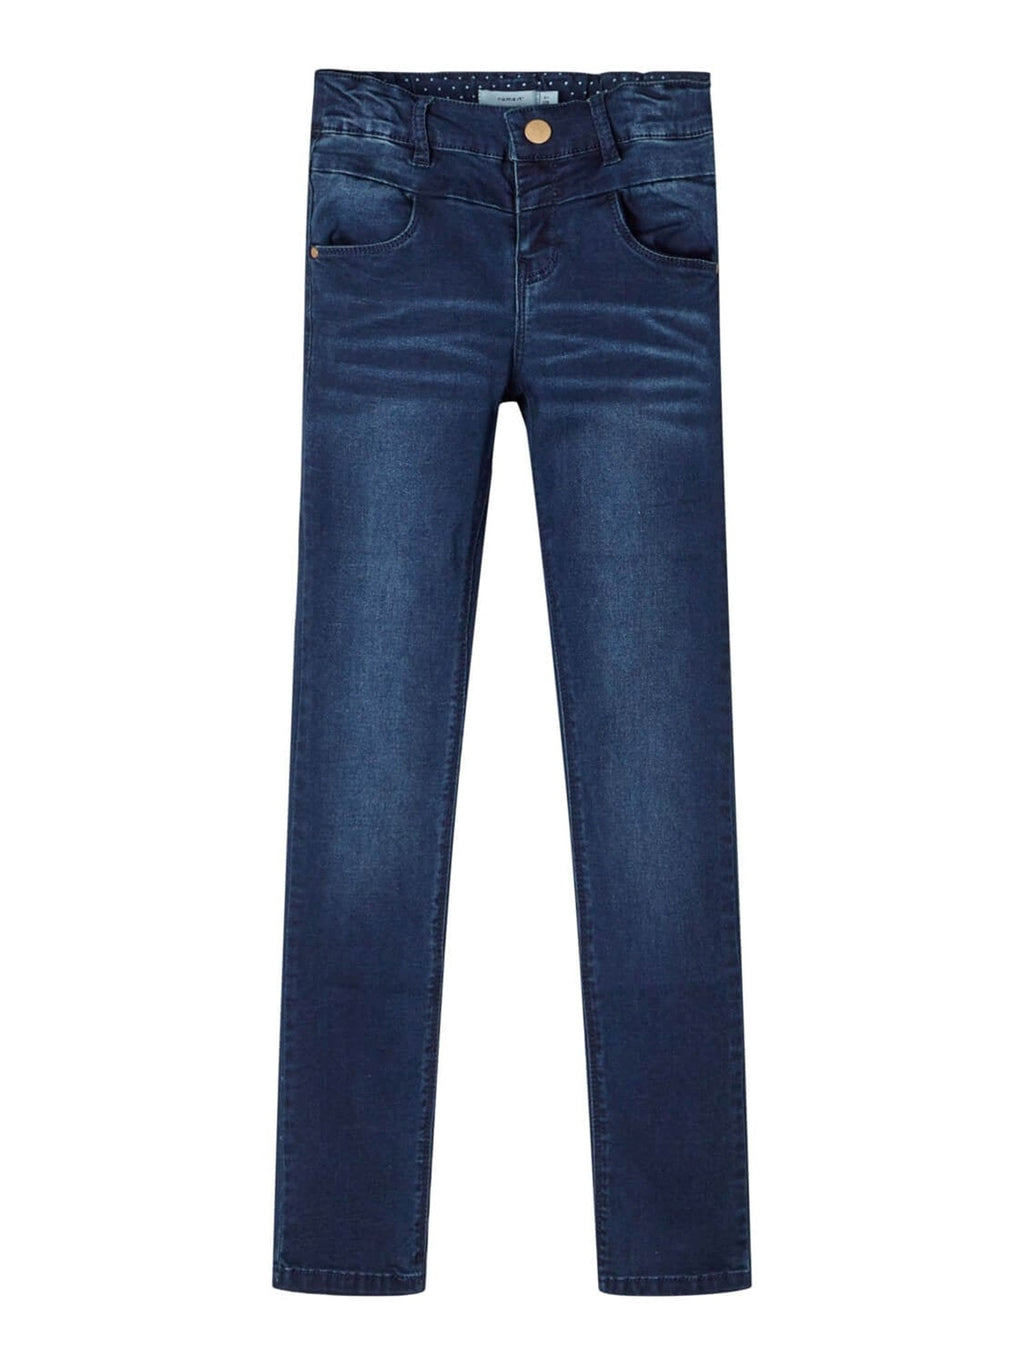 Polly Skinny Jeans - dunkelblauer Jeans